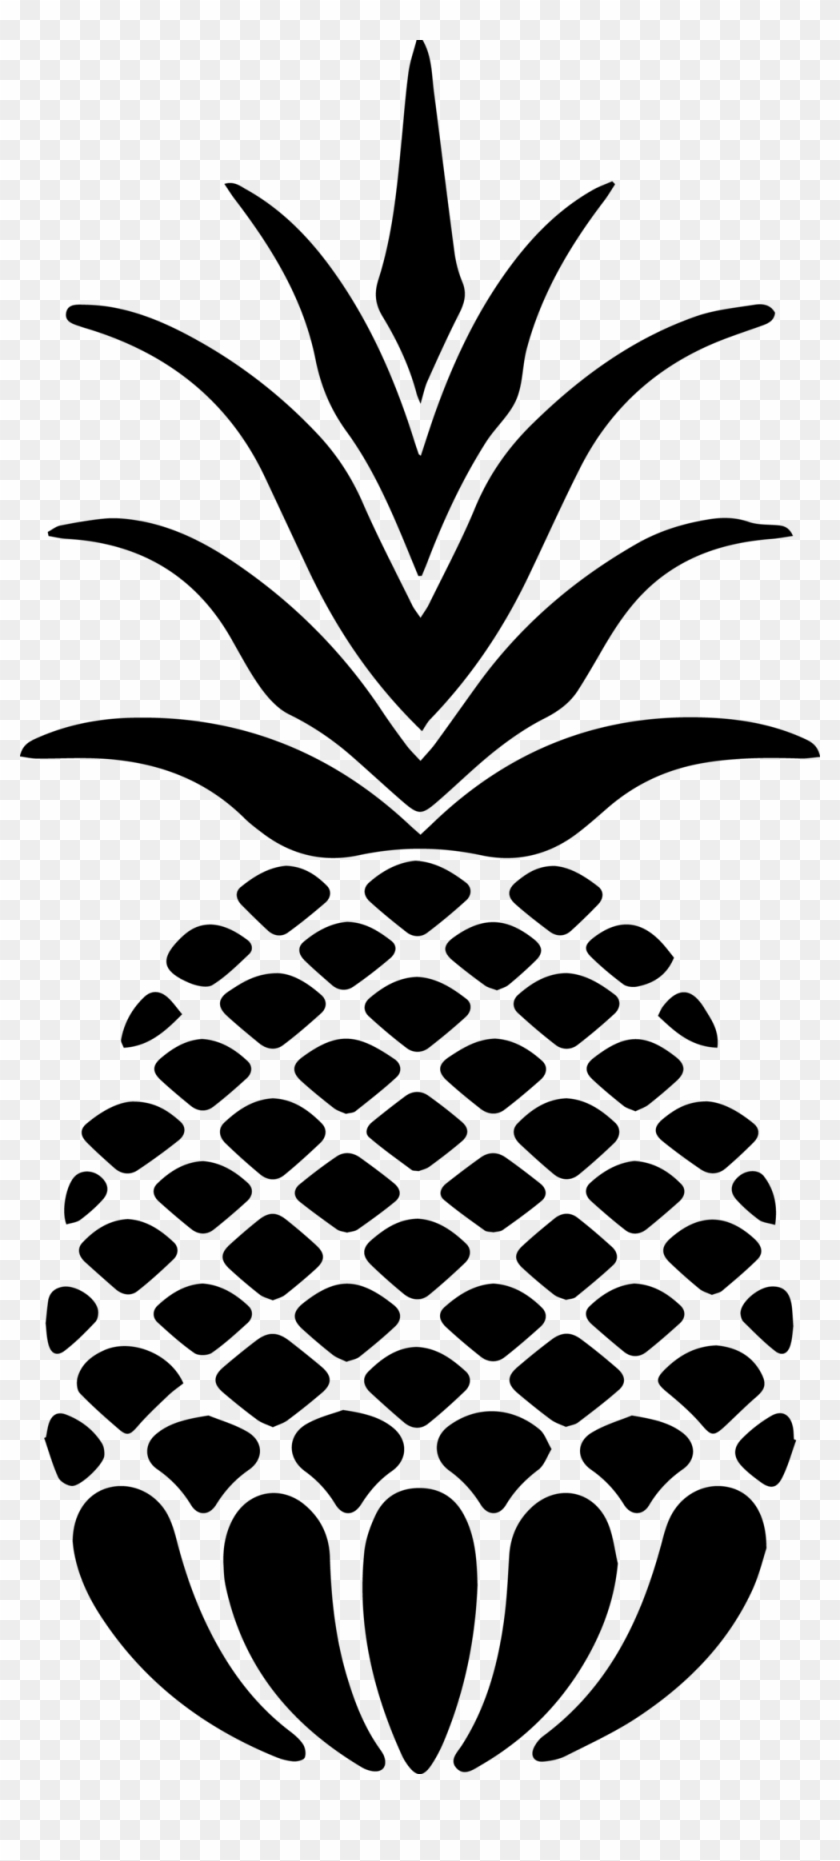 Drawing Pineapple Black And White - Silhouette Pineapple Clipart Png Transparent Png #3474436